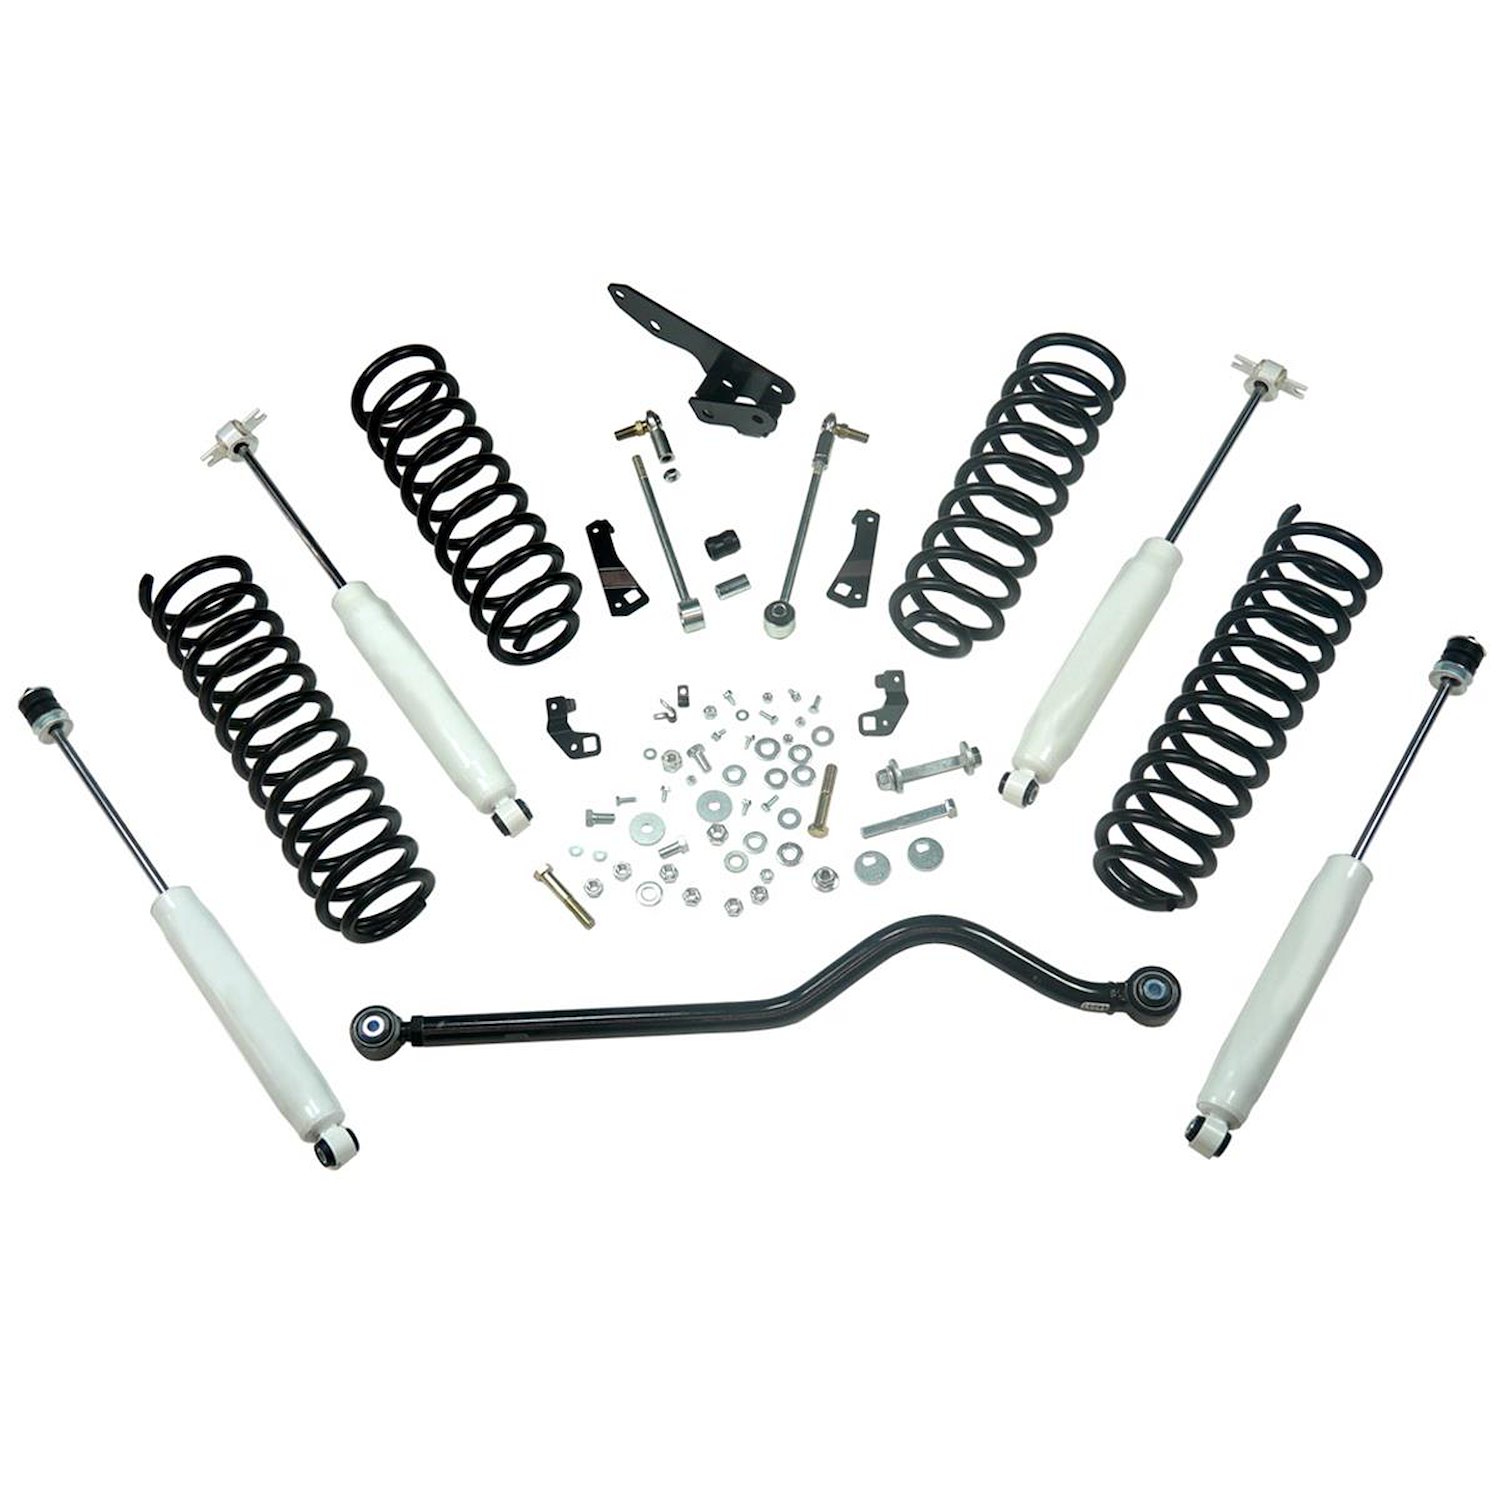 61404 Front and Rear Suspension Lift Kit, Lift